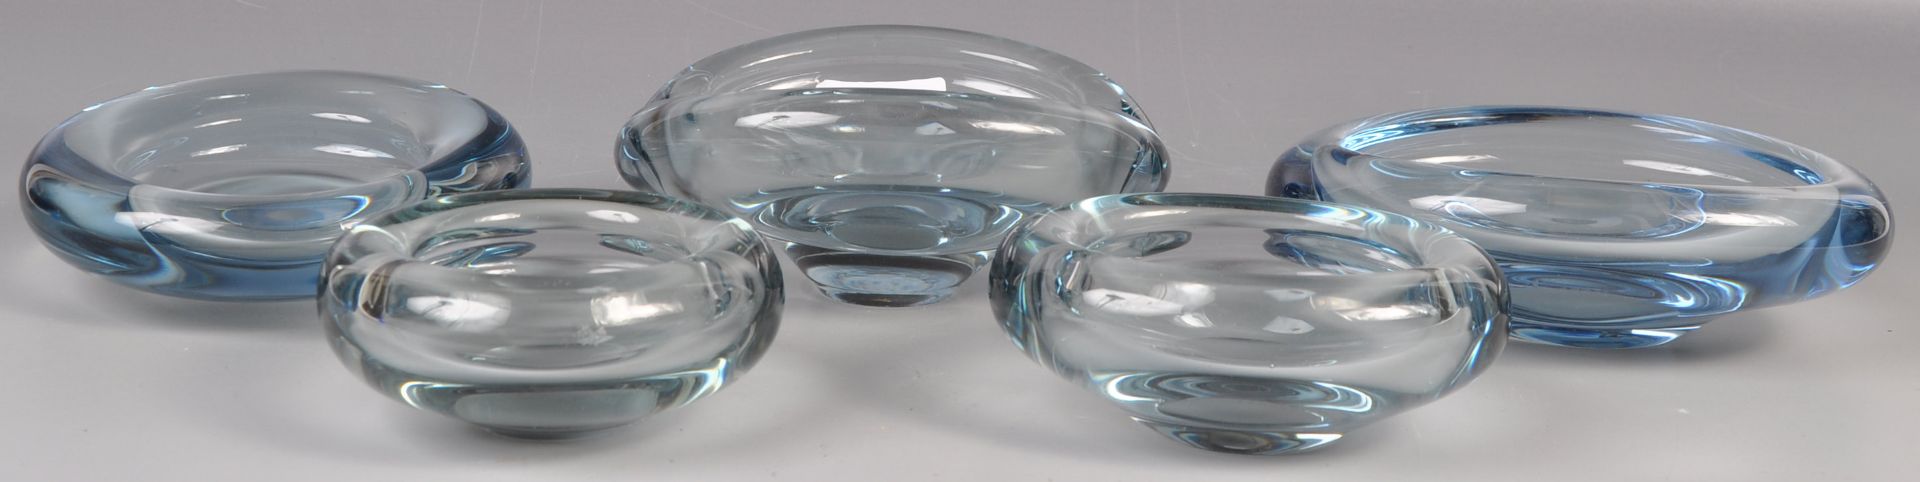 COLLECTION OF DANISH GLASS HOLMEGAARD BOWLS BY P. LUTKEN - Image 3 of 8